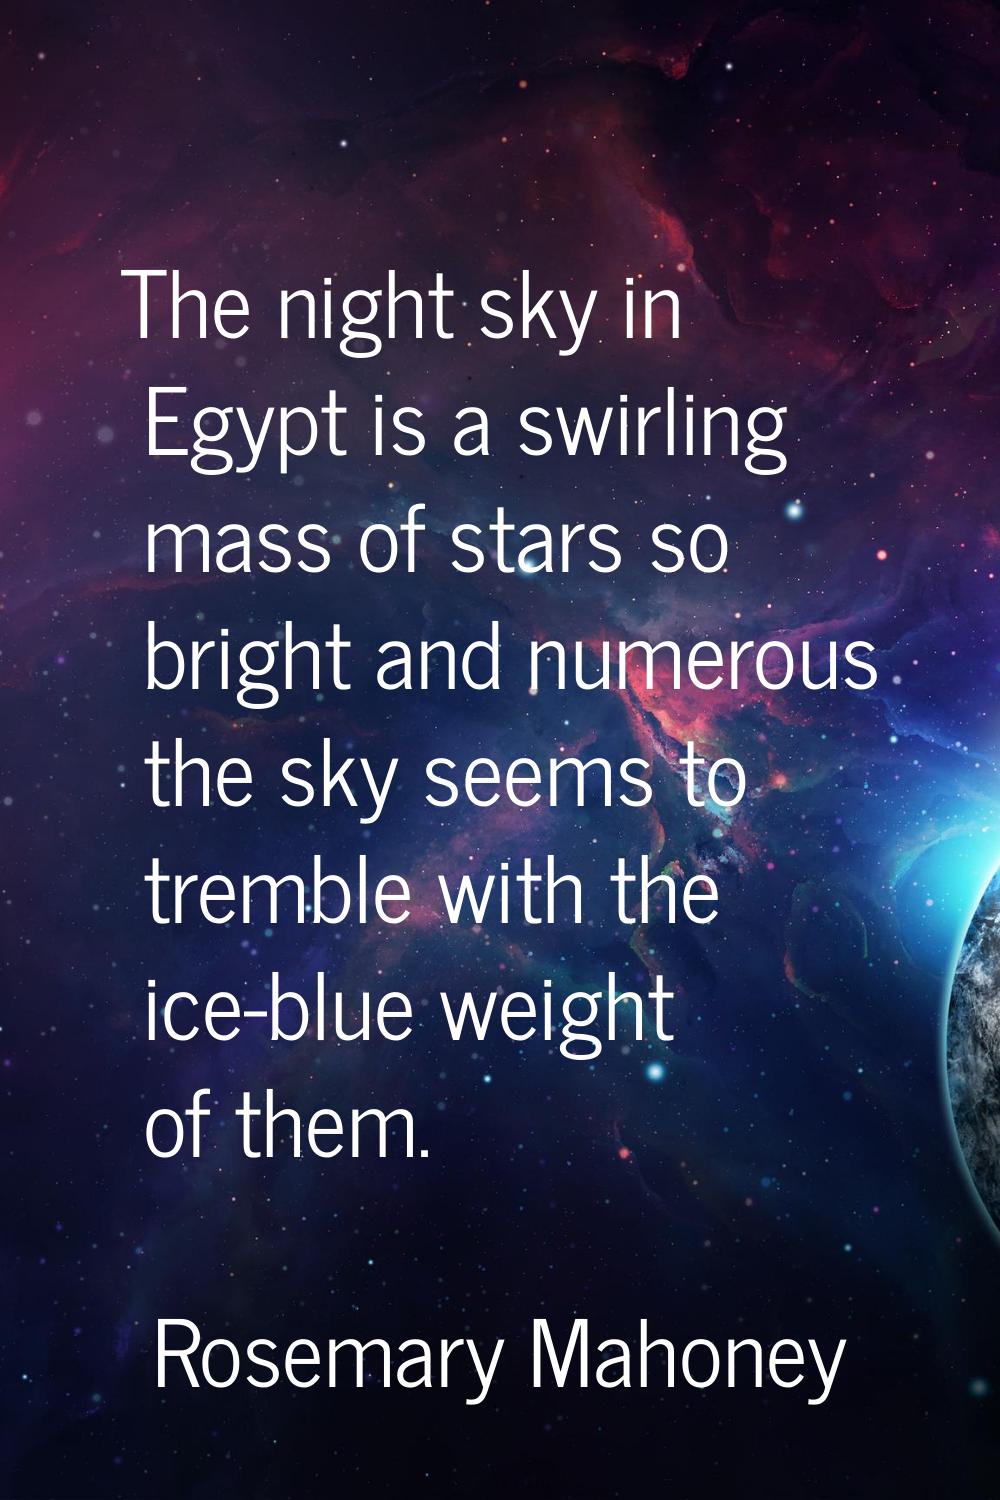 The night sky in Egypt is a swirling mass of stars so bright and numerous the sky seems to tremble 